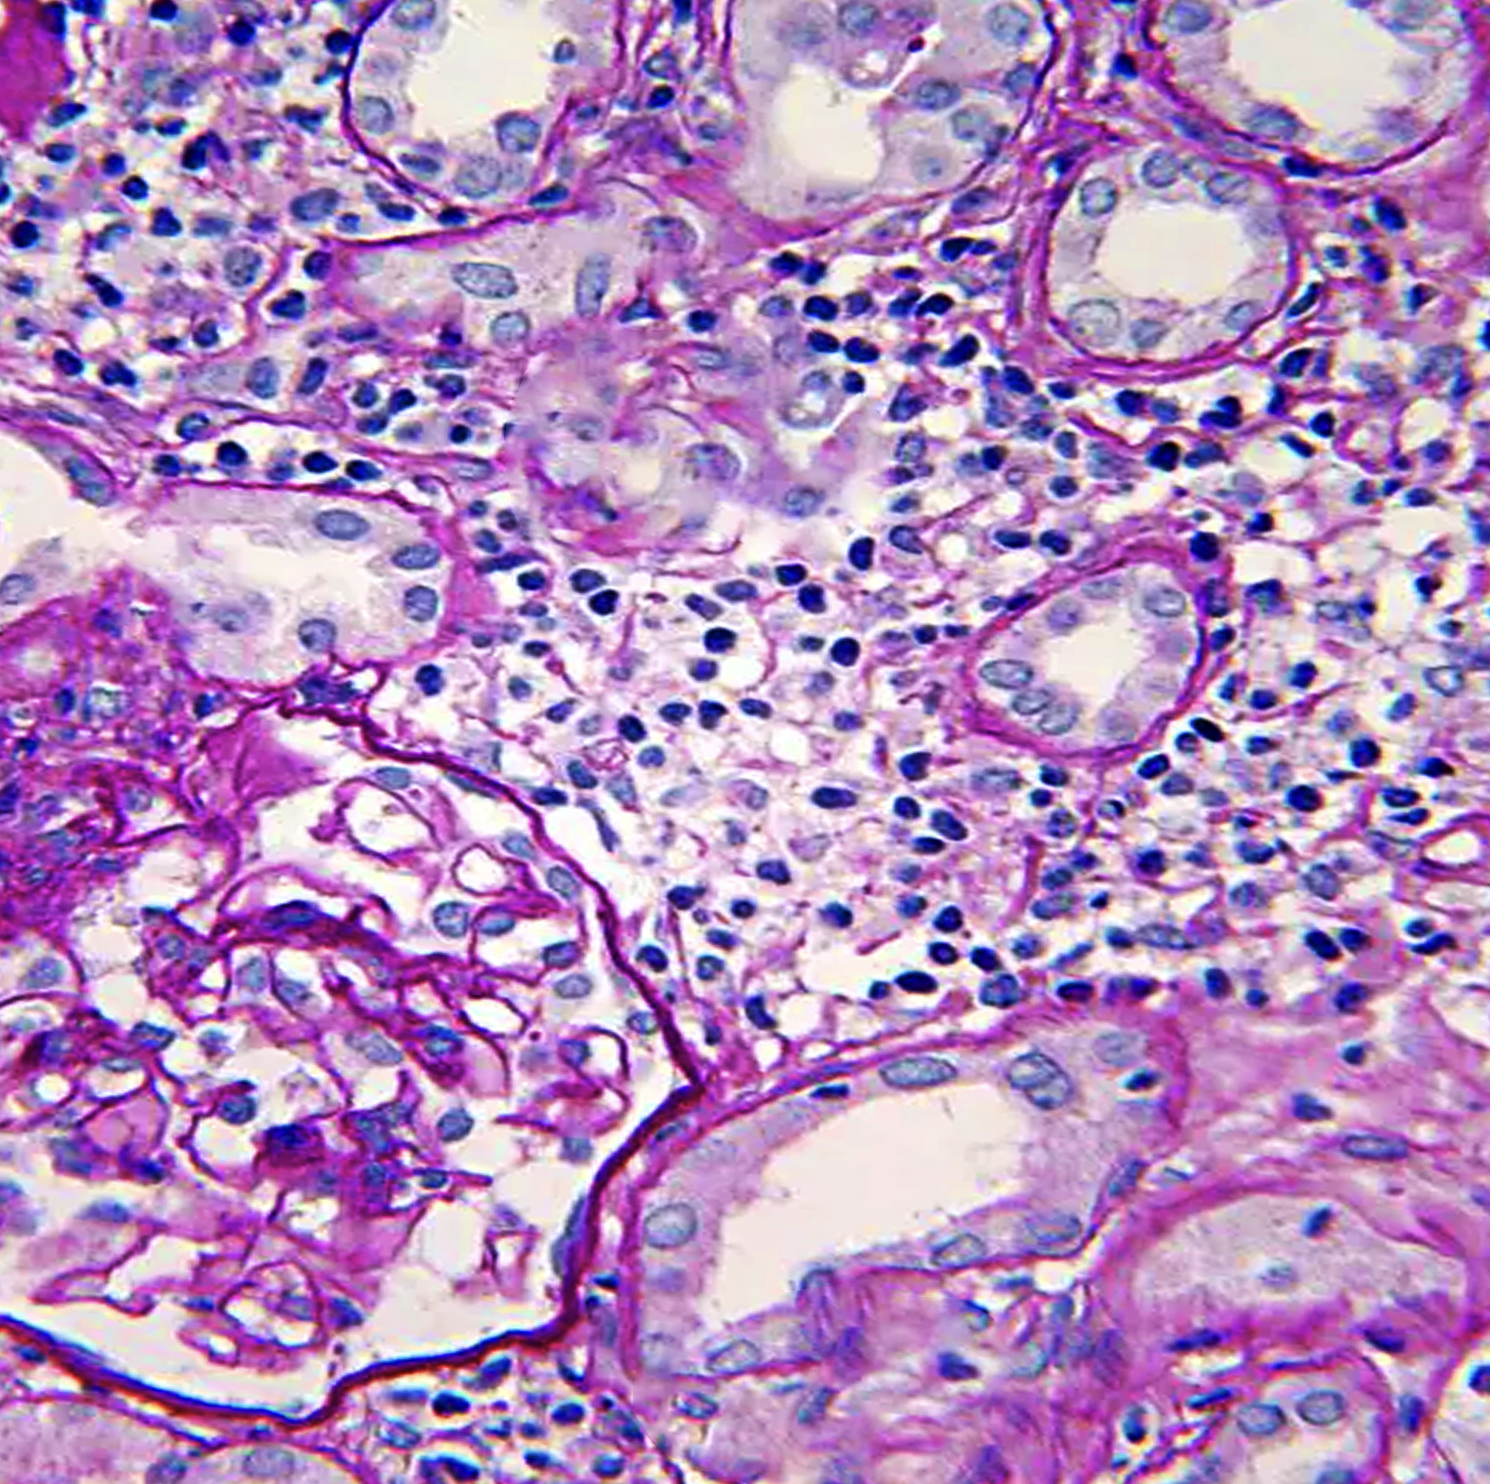 Kidney biopsy showing inflammatory infiltrate indicative of tubulointerstitial nephritis.